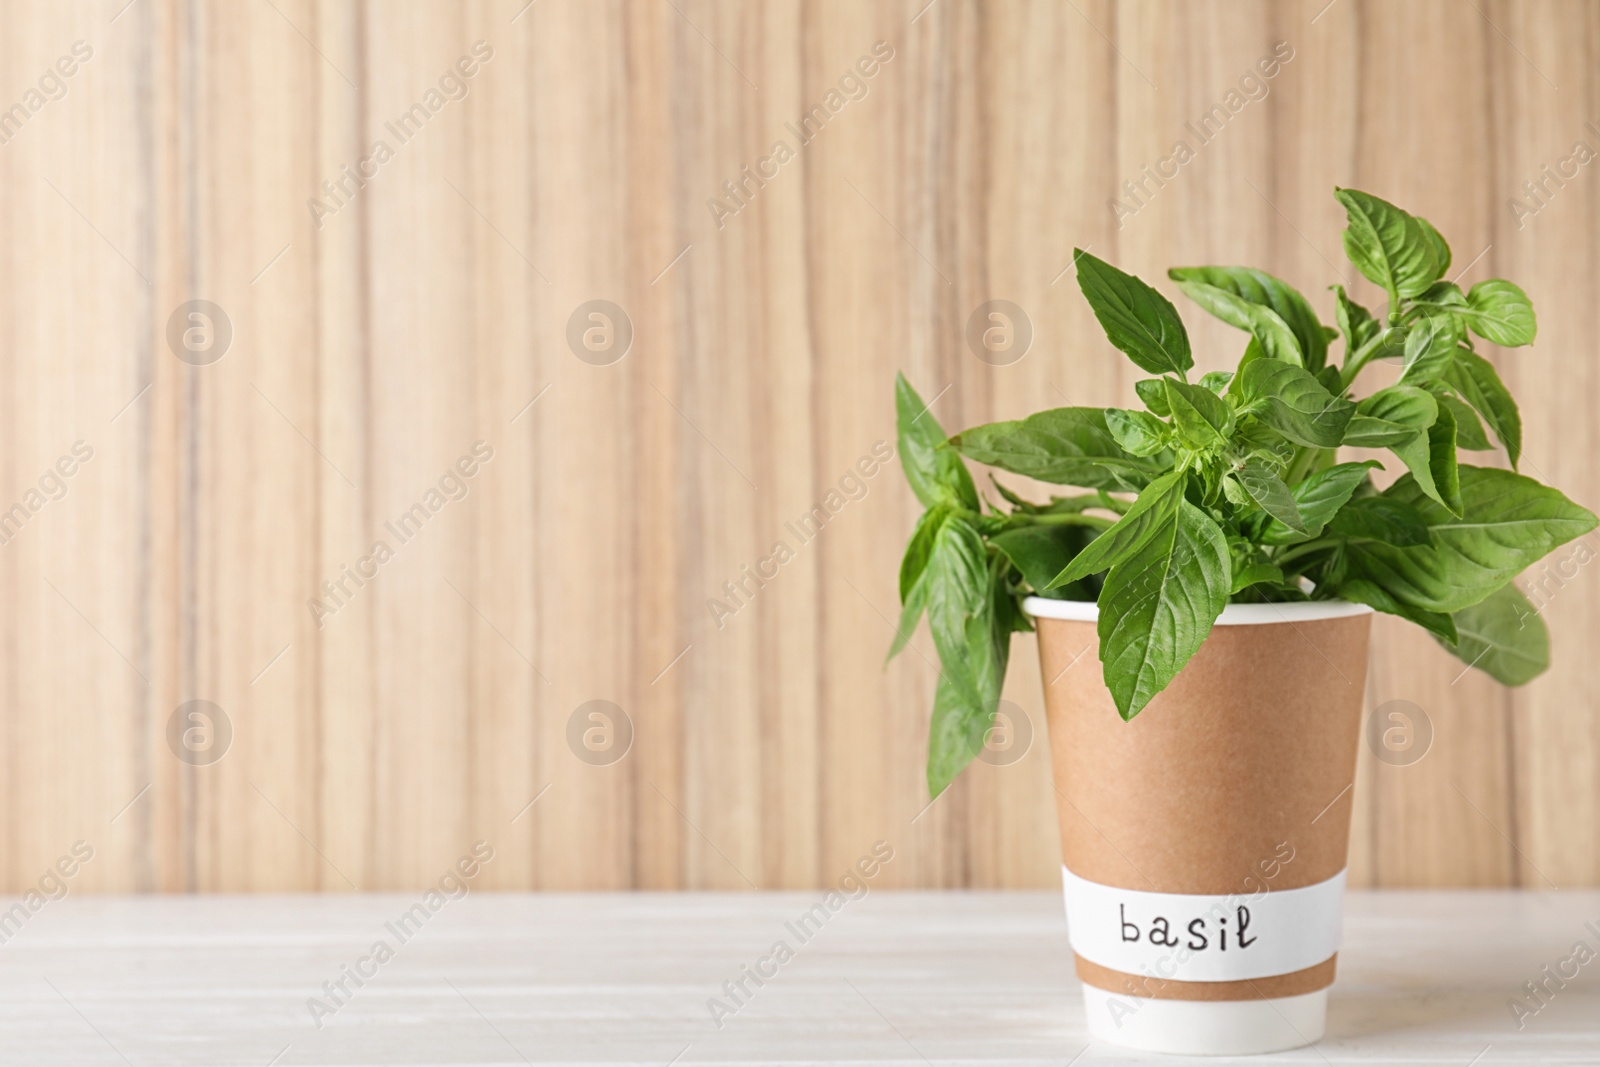 Photo of Seedling of fresh basil in paper cup with name label on white table near wooden wall. Space for text